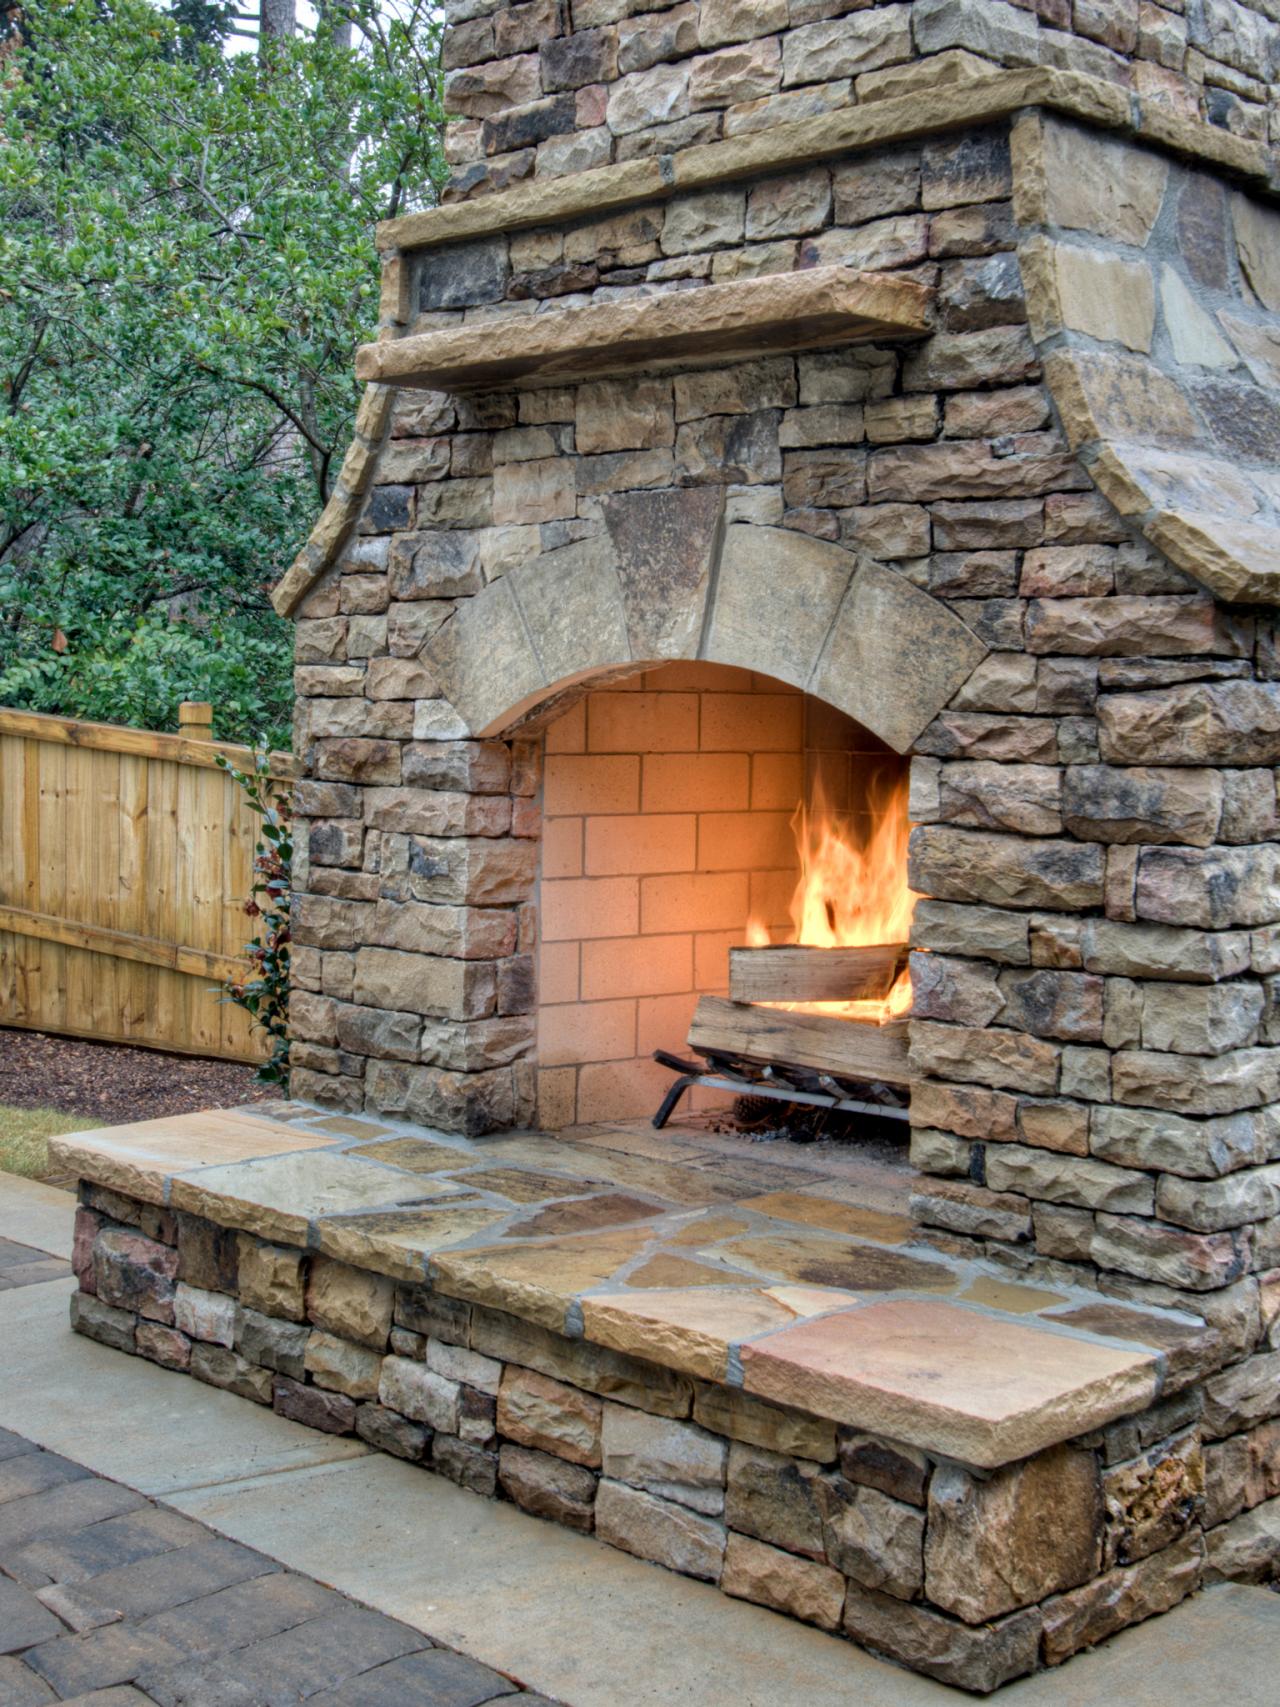 How To Build An Outdoor Fireplace, What Kind Of Brick To Use For Outdoor Fireplace